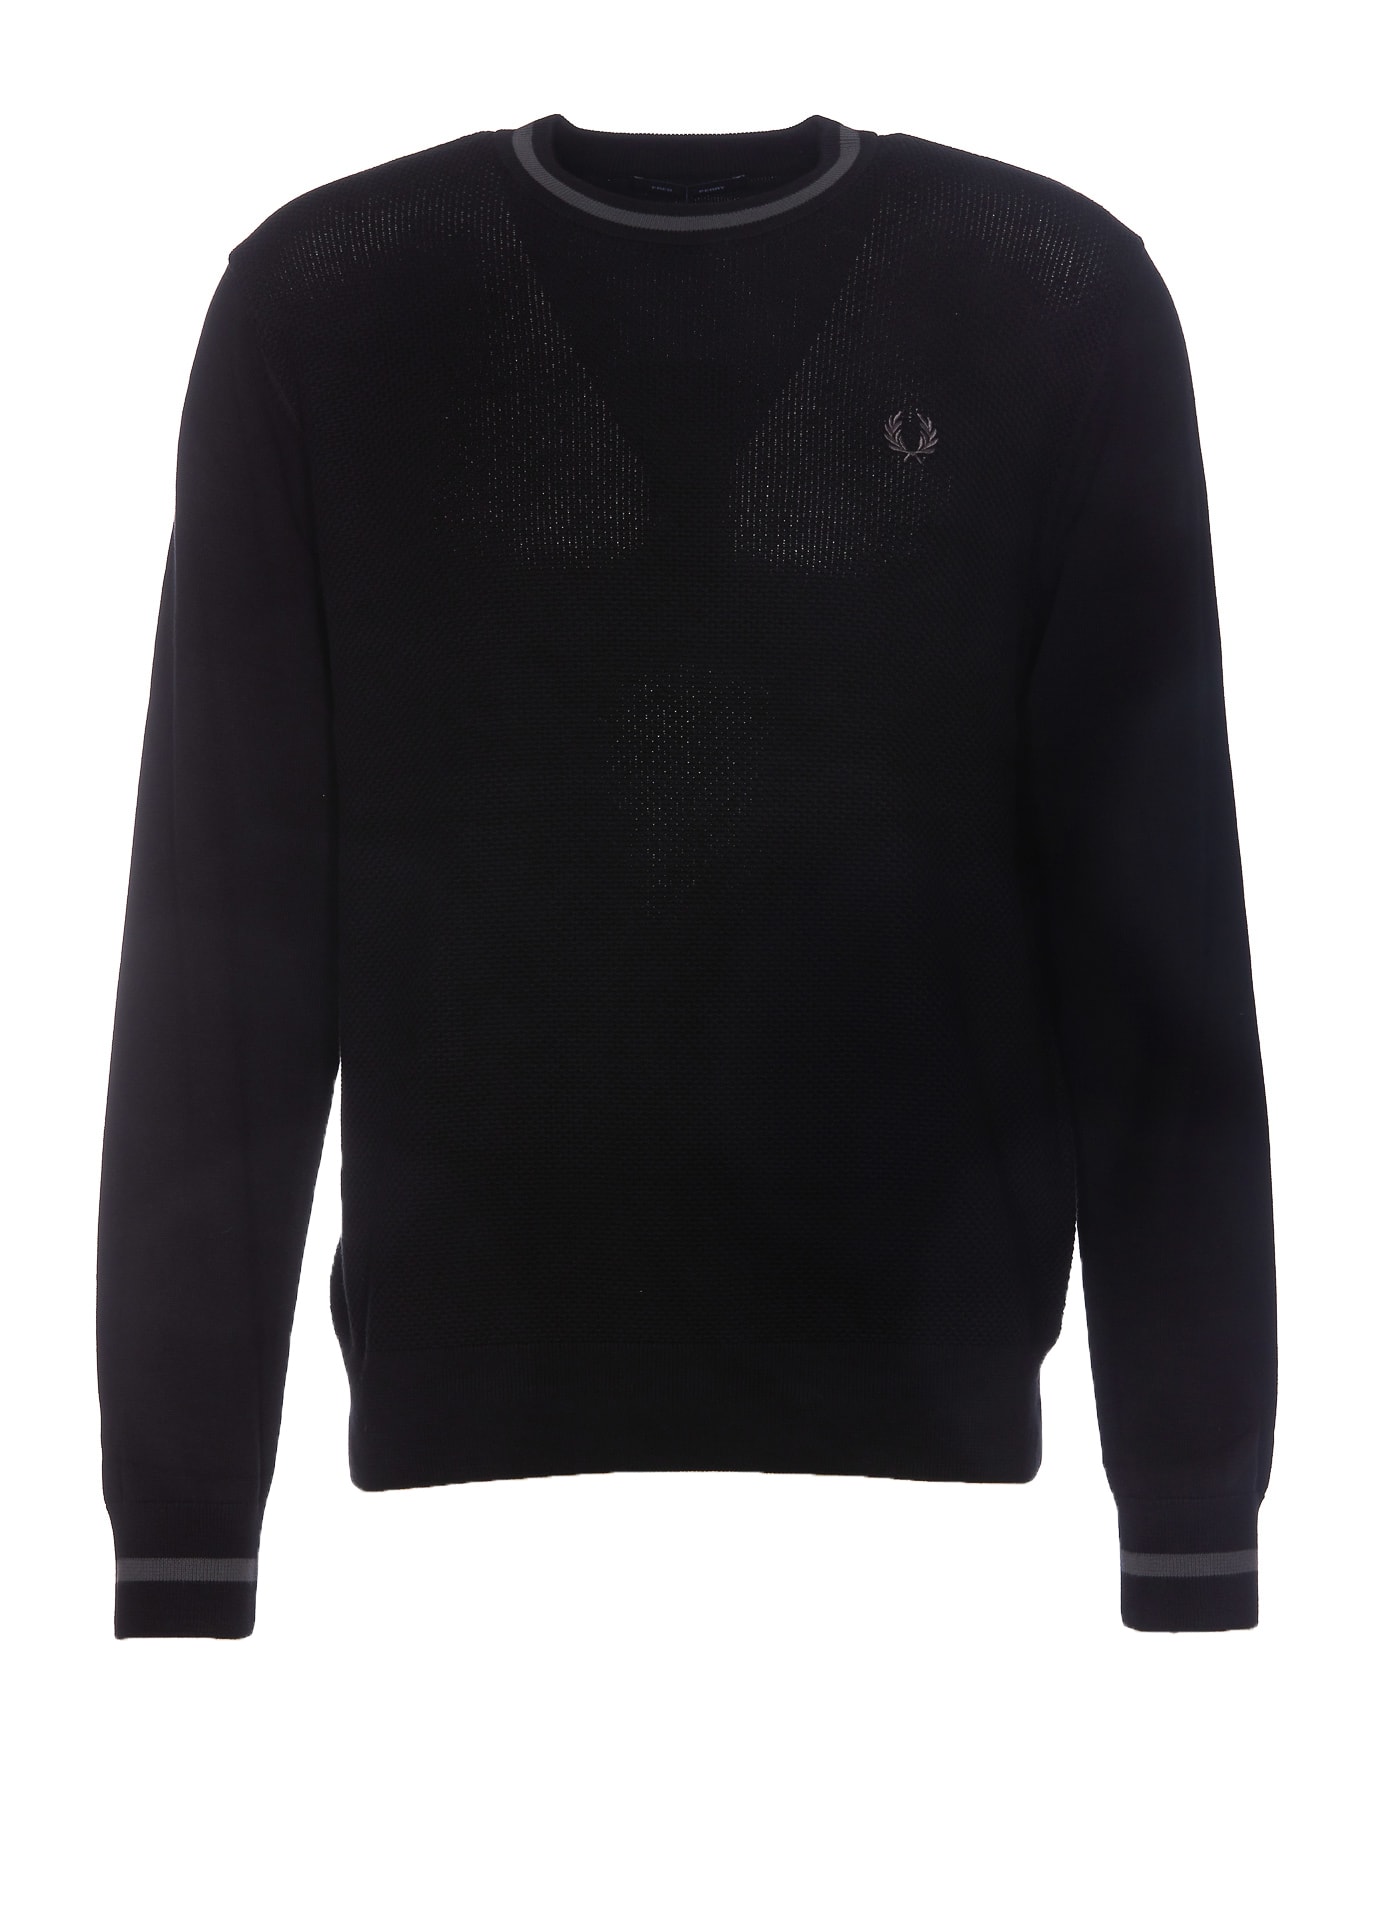 FRED PERRY LOGO SWEATER